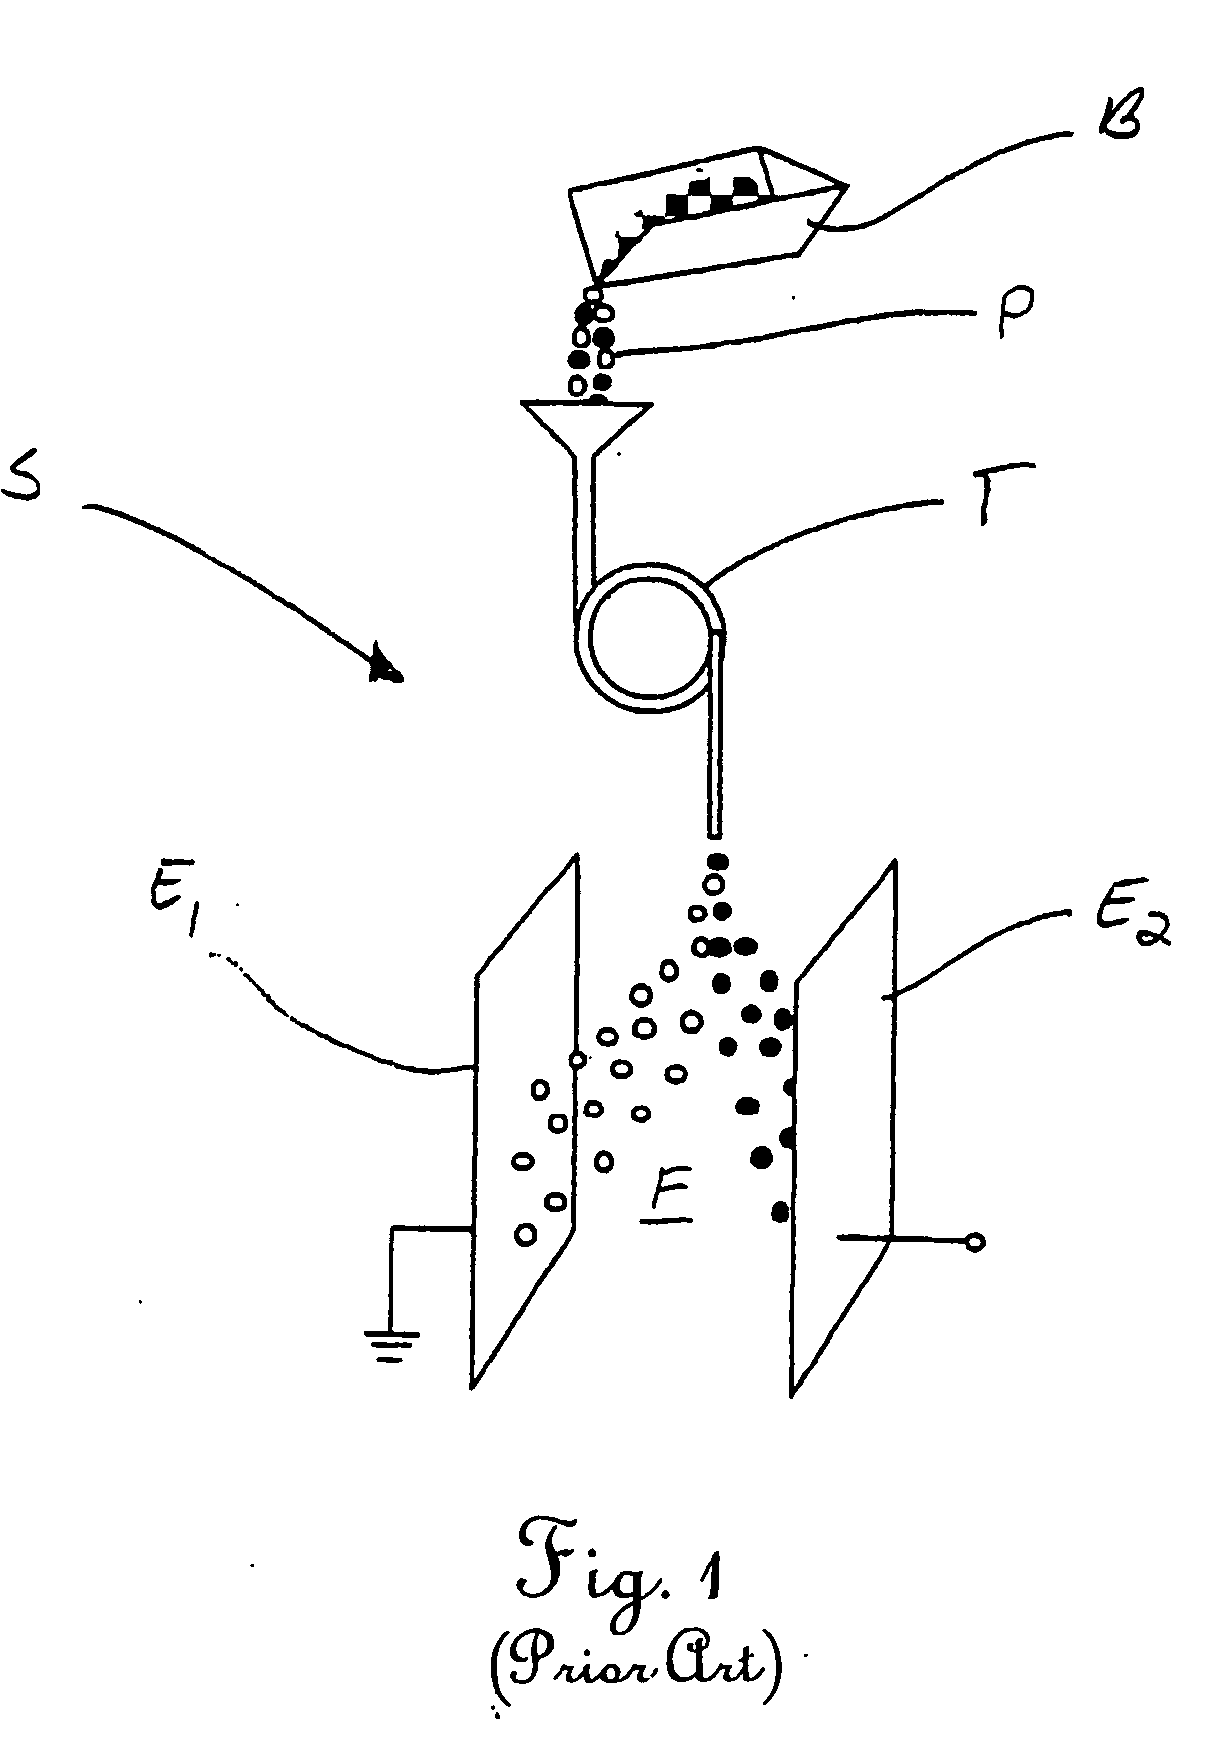 Electrostatic particle charger, electrostatic separation system, and related methods